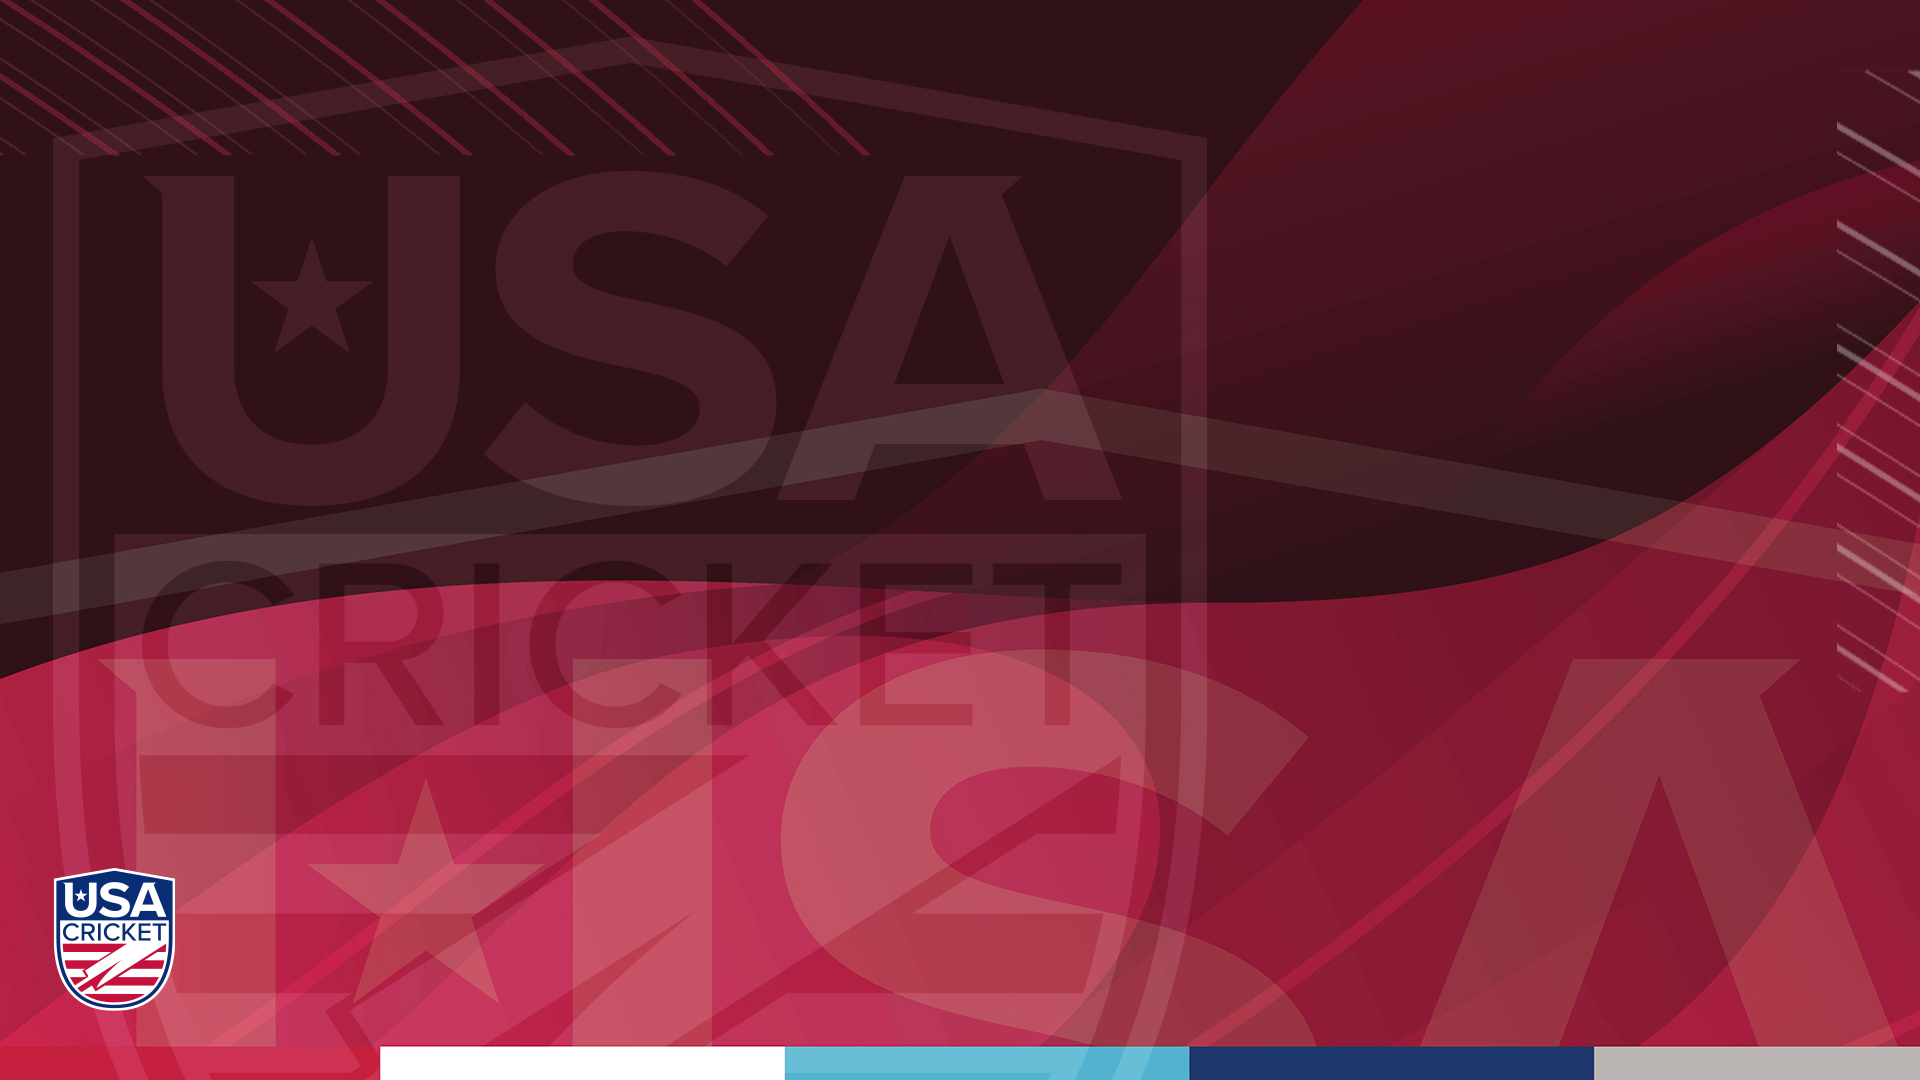 WATCH LIVE: USA Cricket Annual General Meeting